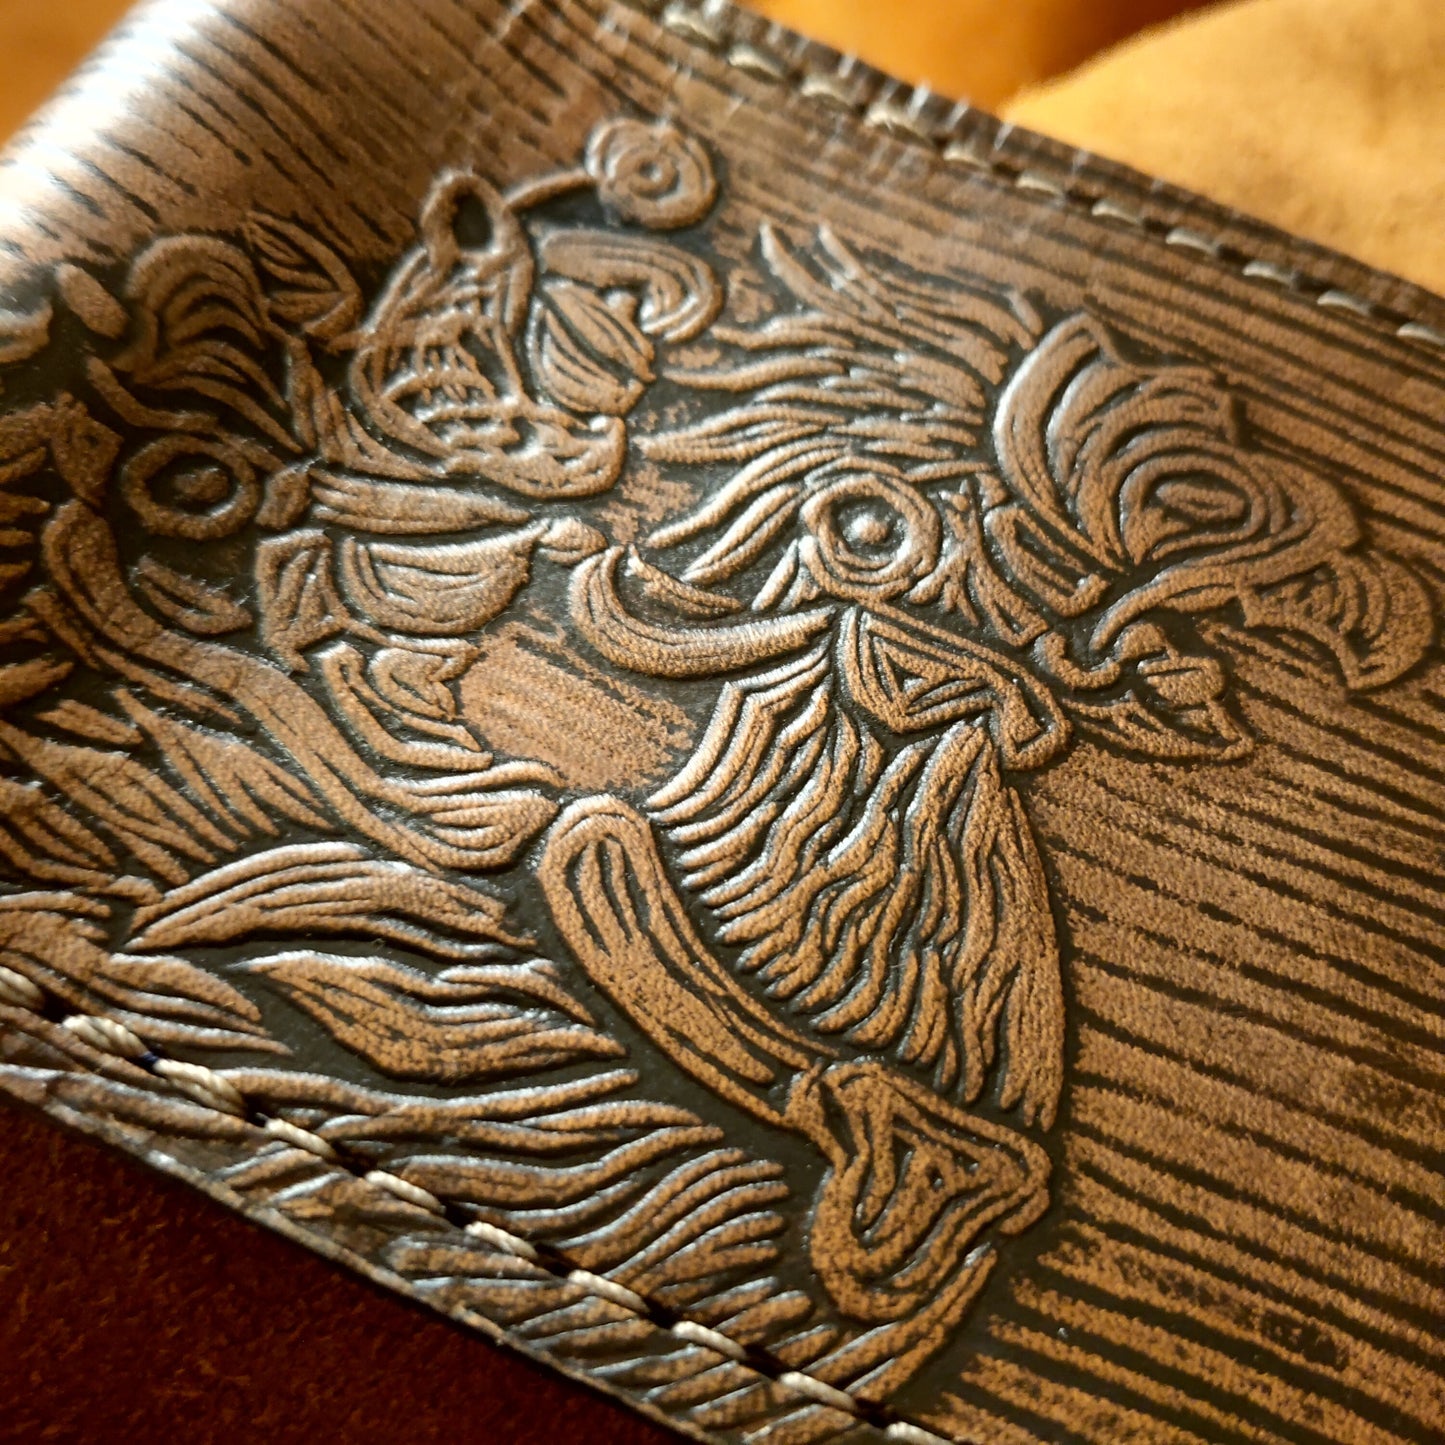 Textured - Chocobo and  Rider - dark brown Leather Bifold Wallet - Handcrafted Final Fantasy 14 inspired Wallet -